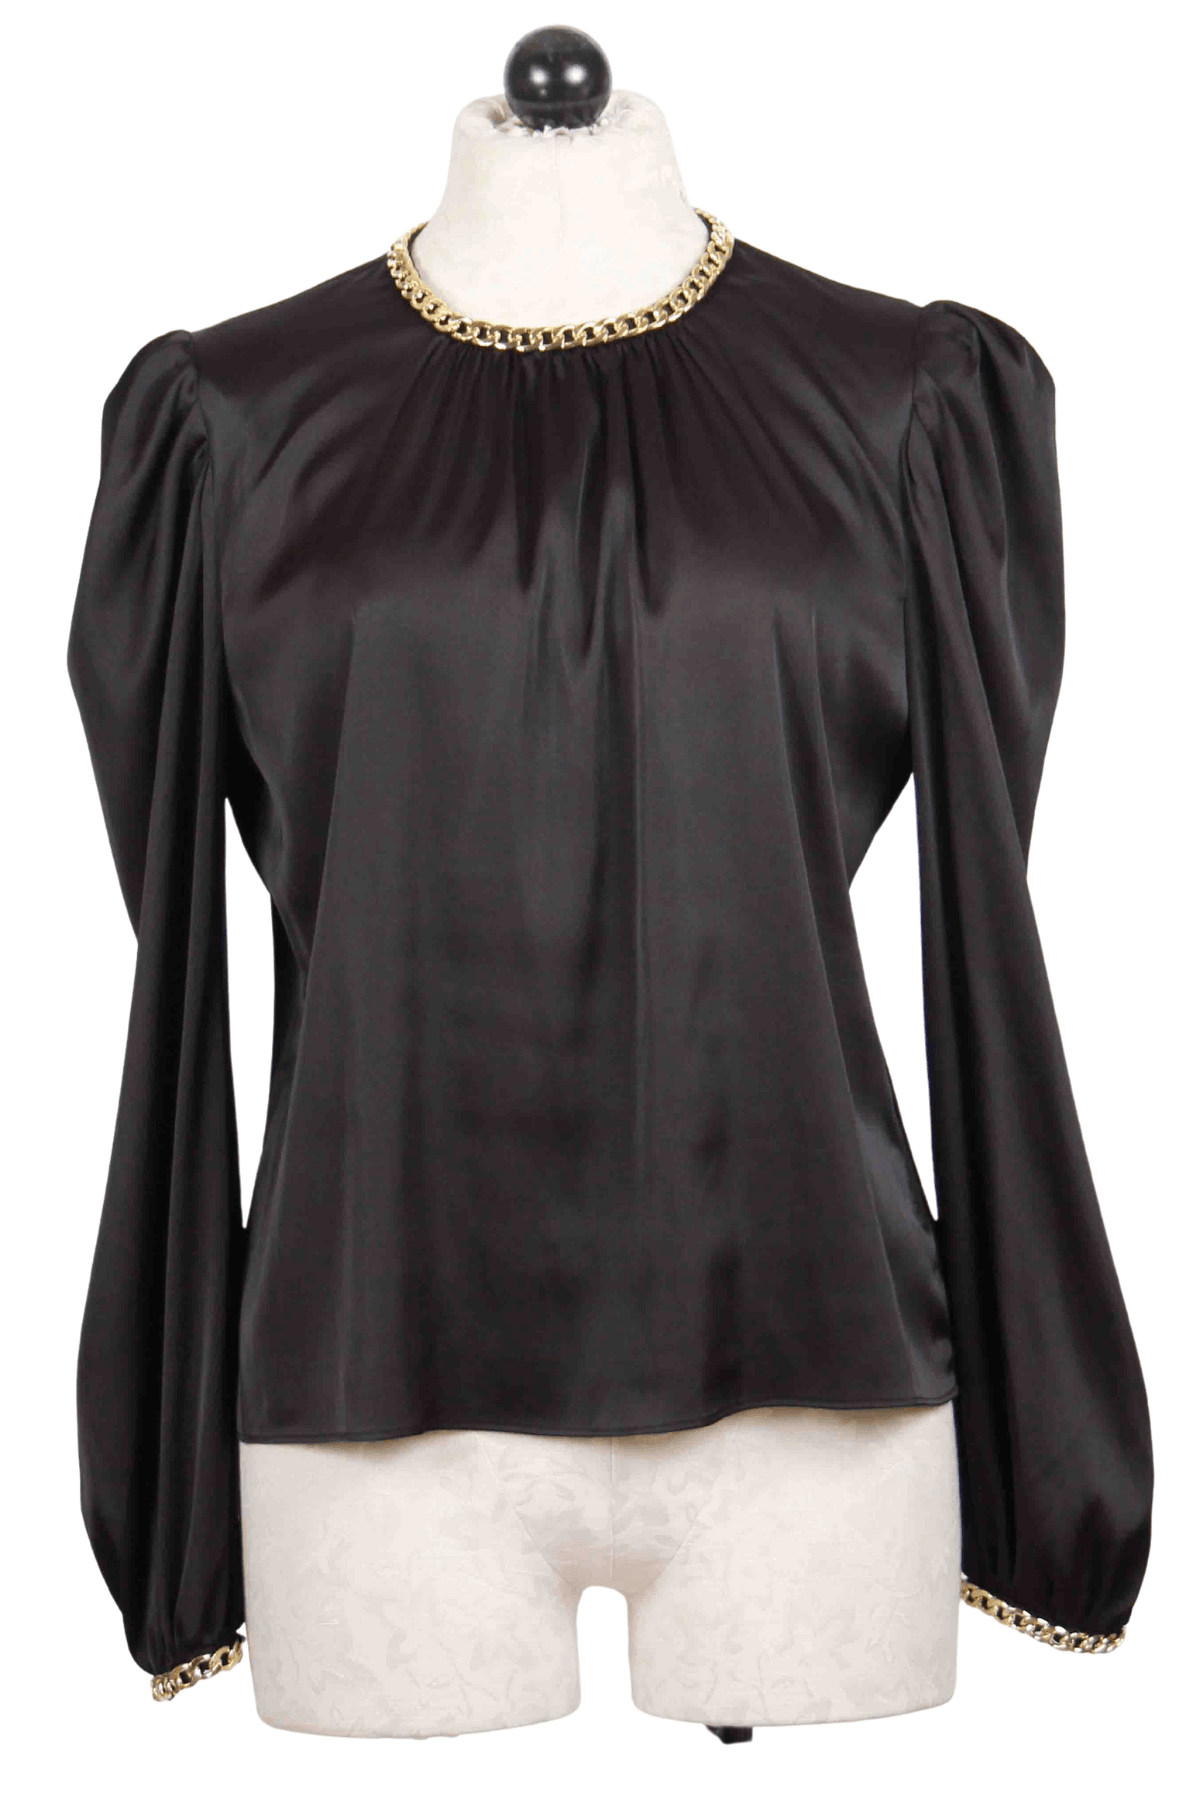 black Perry Chained Crew Neck and Cuff Blouse by Generation Love